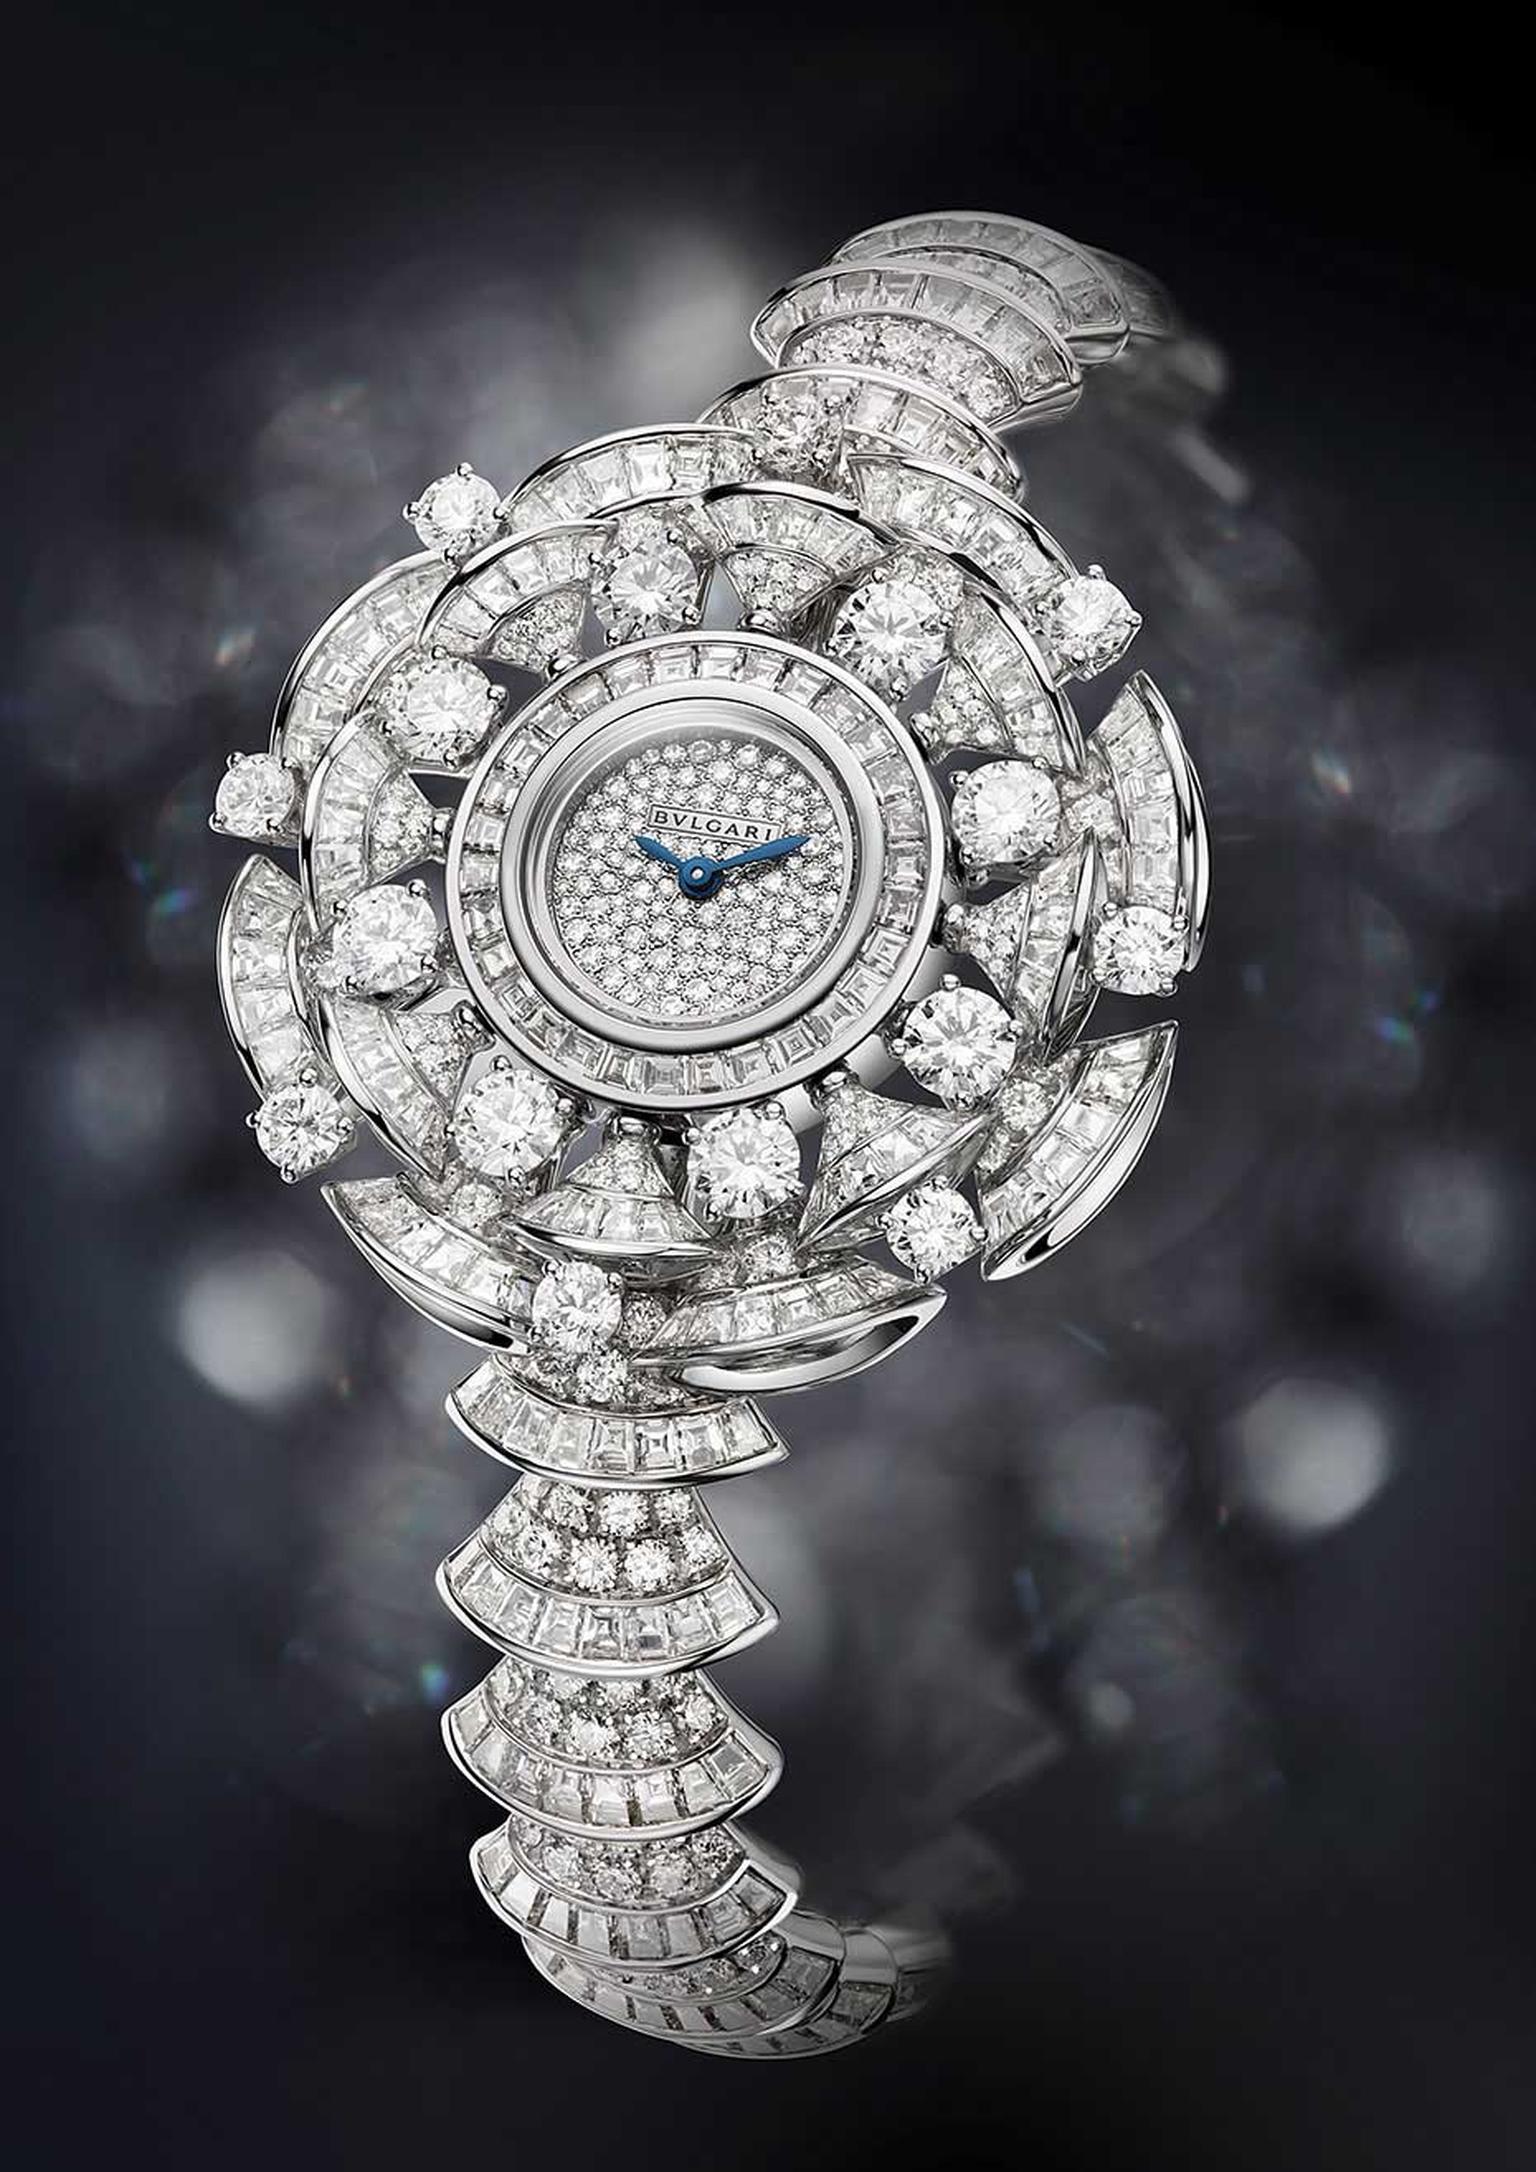 Bulgari Diva watch features 302 baguette-cut diamonds, 16 round-cut diamonds and 394 brilliant-cut diamonds adding up to 22.62ct.